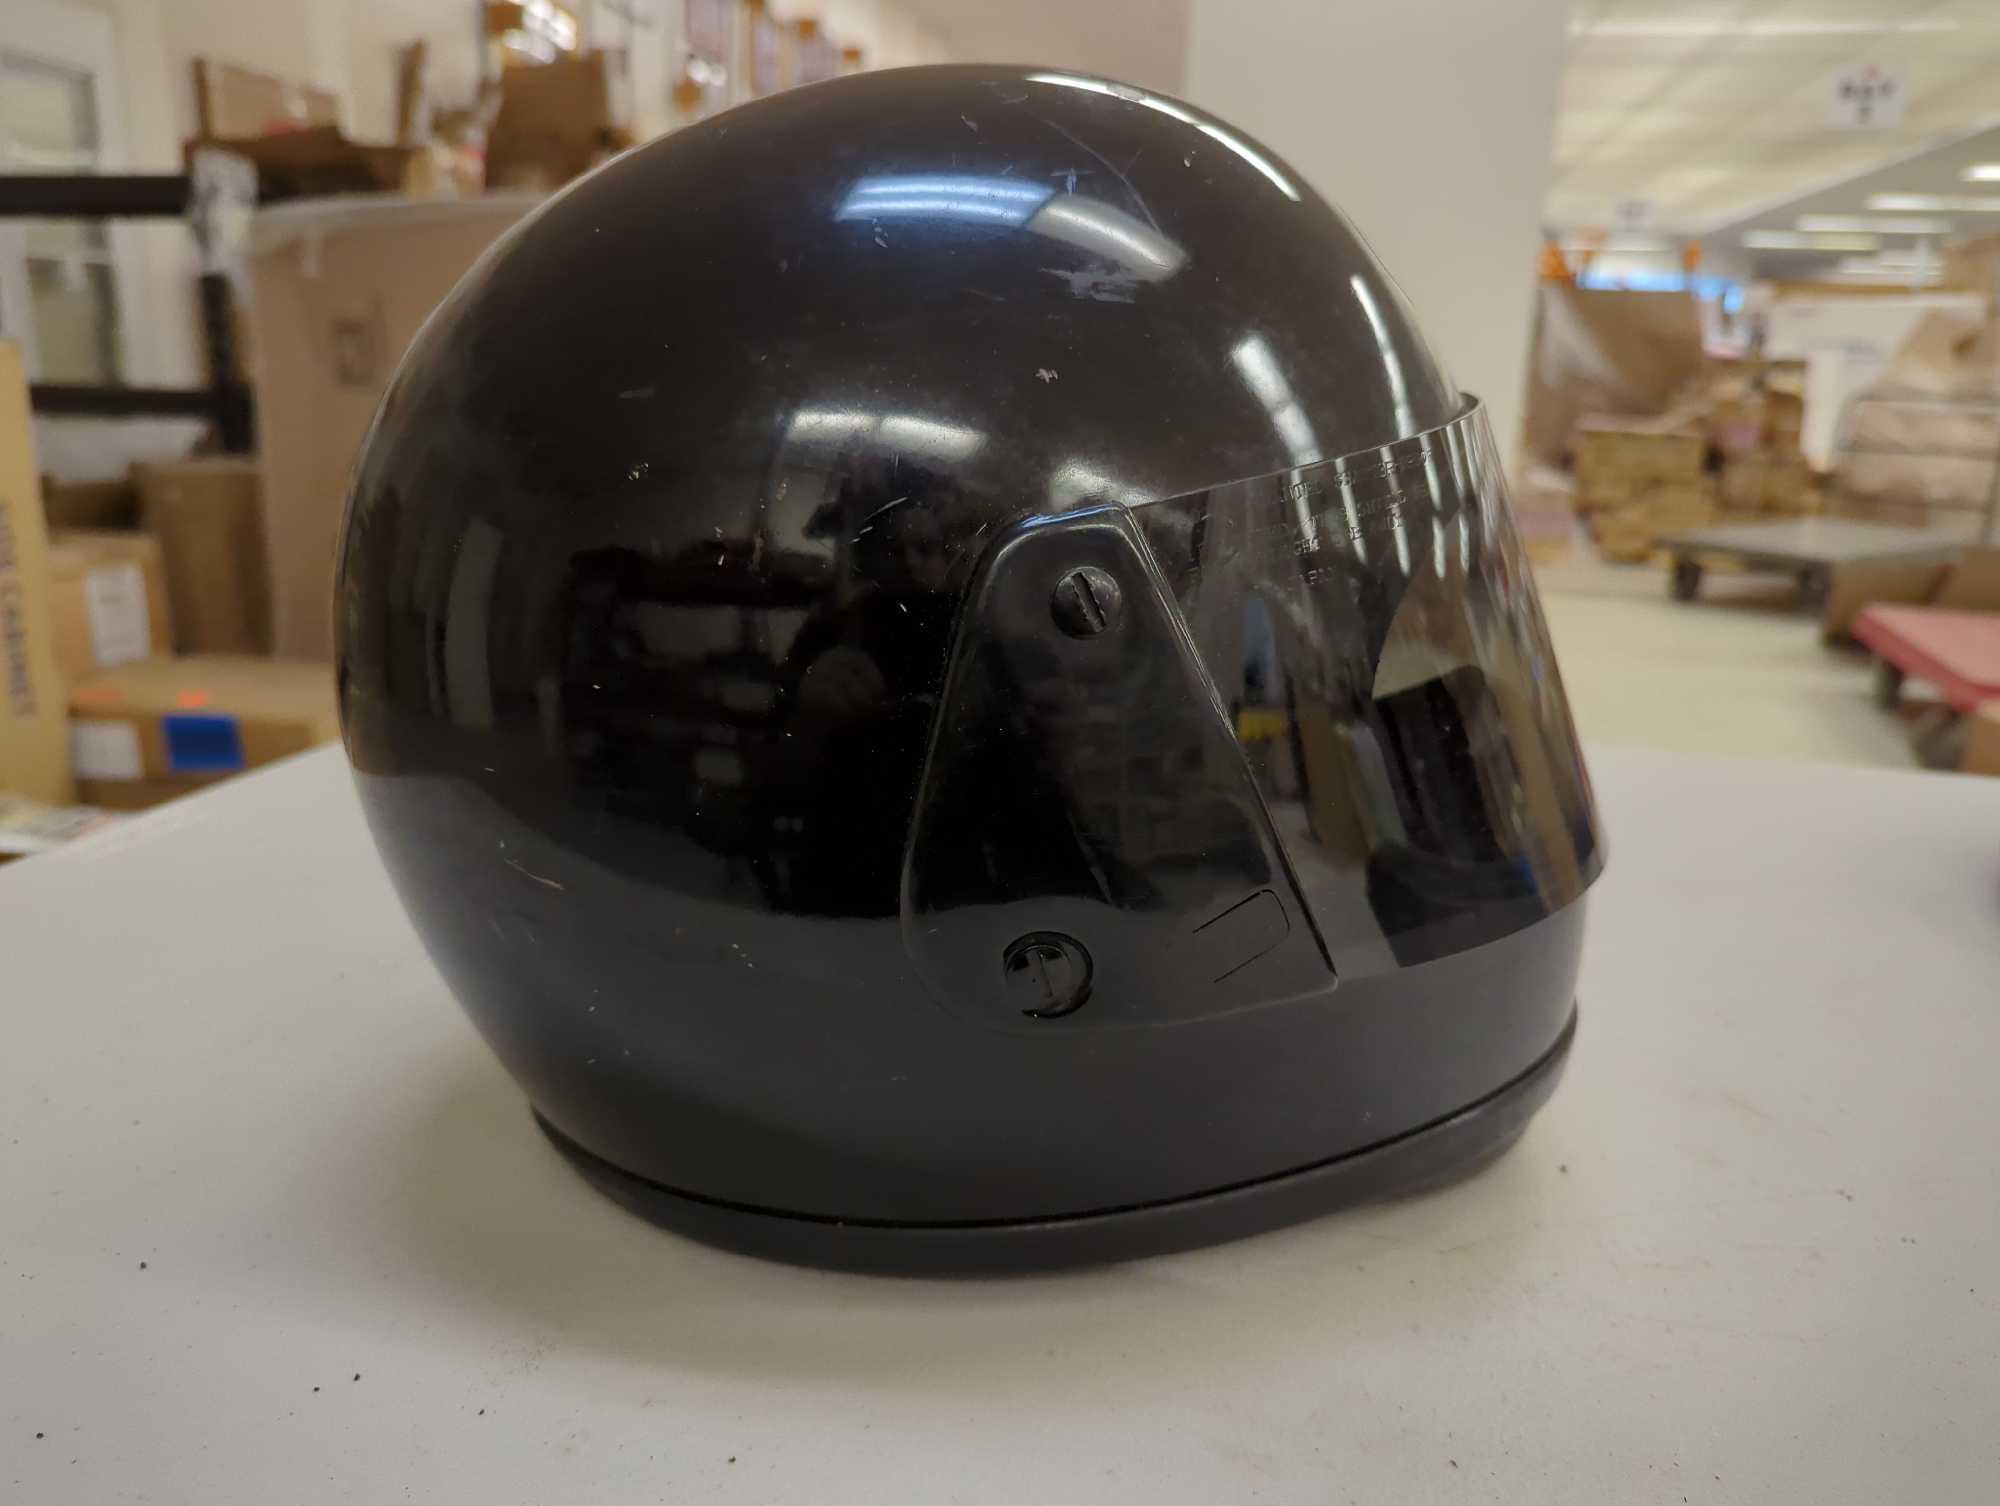 Arai Astro Snell '80 black helmet. Comes with navy blue helmet cover and black Thinsulate insulation